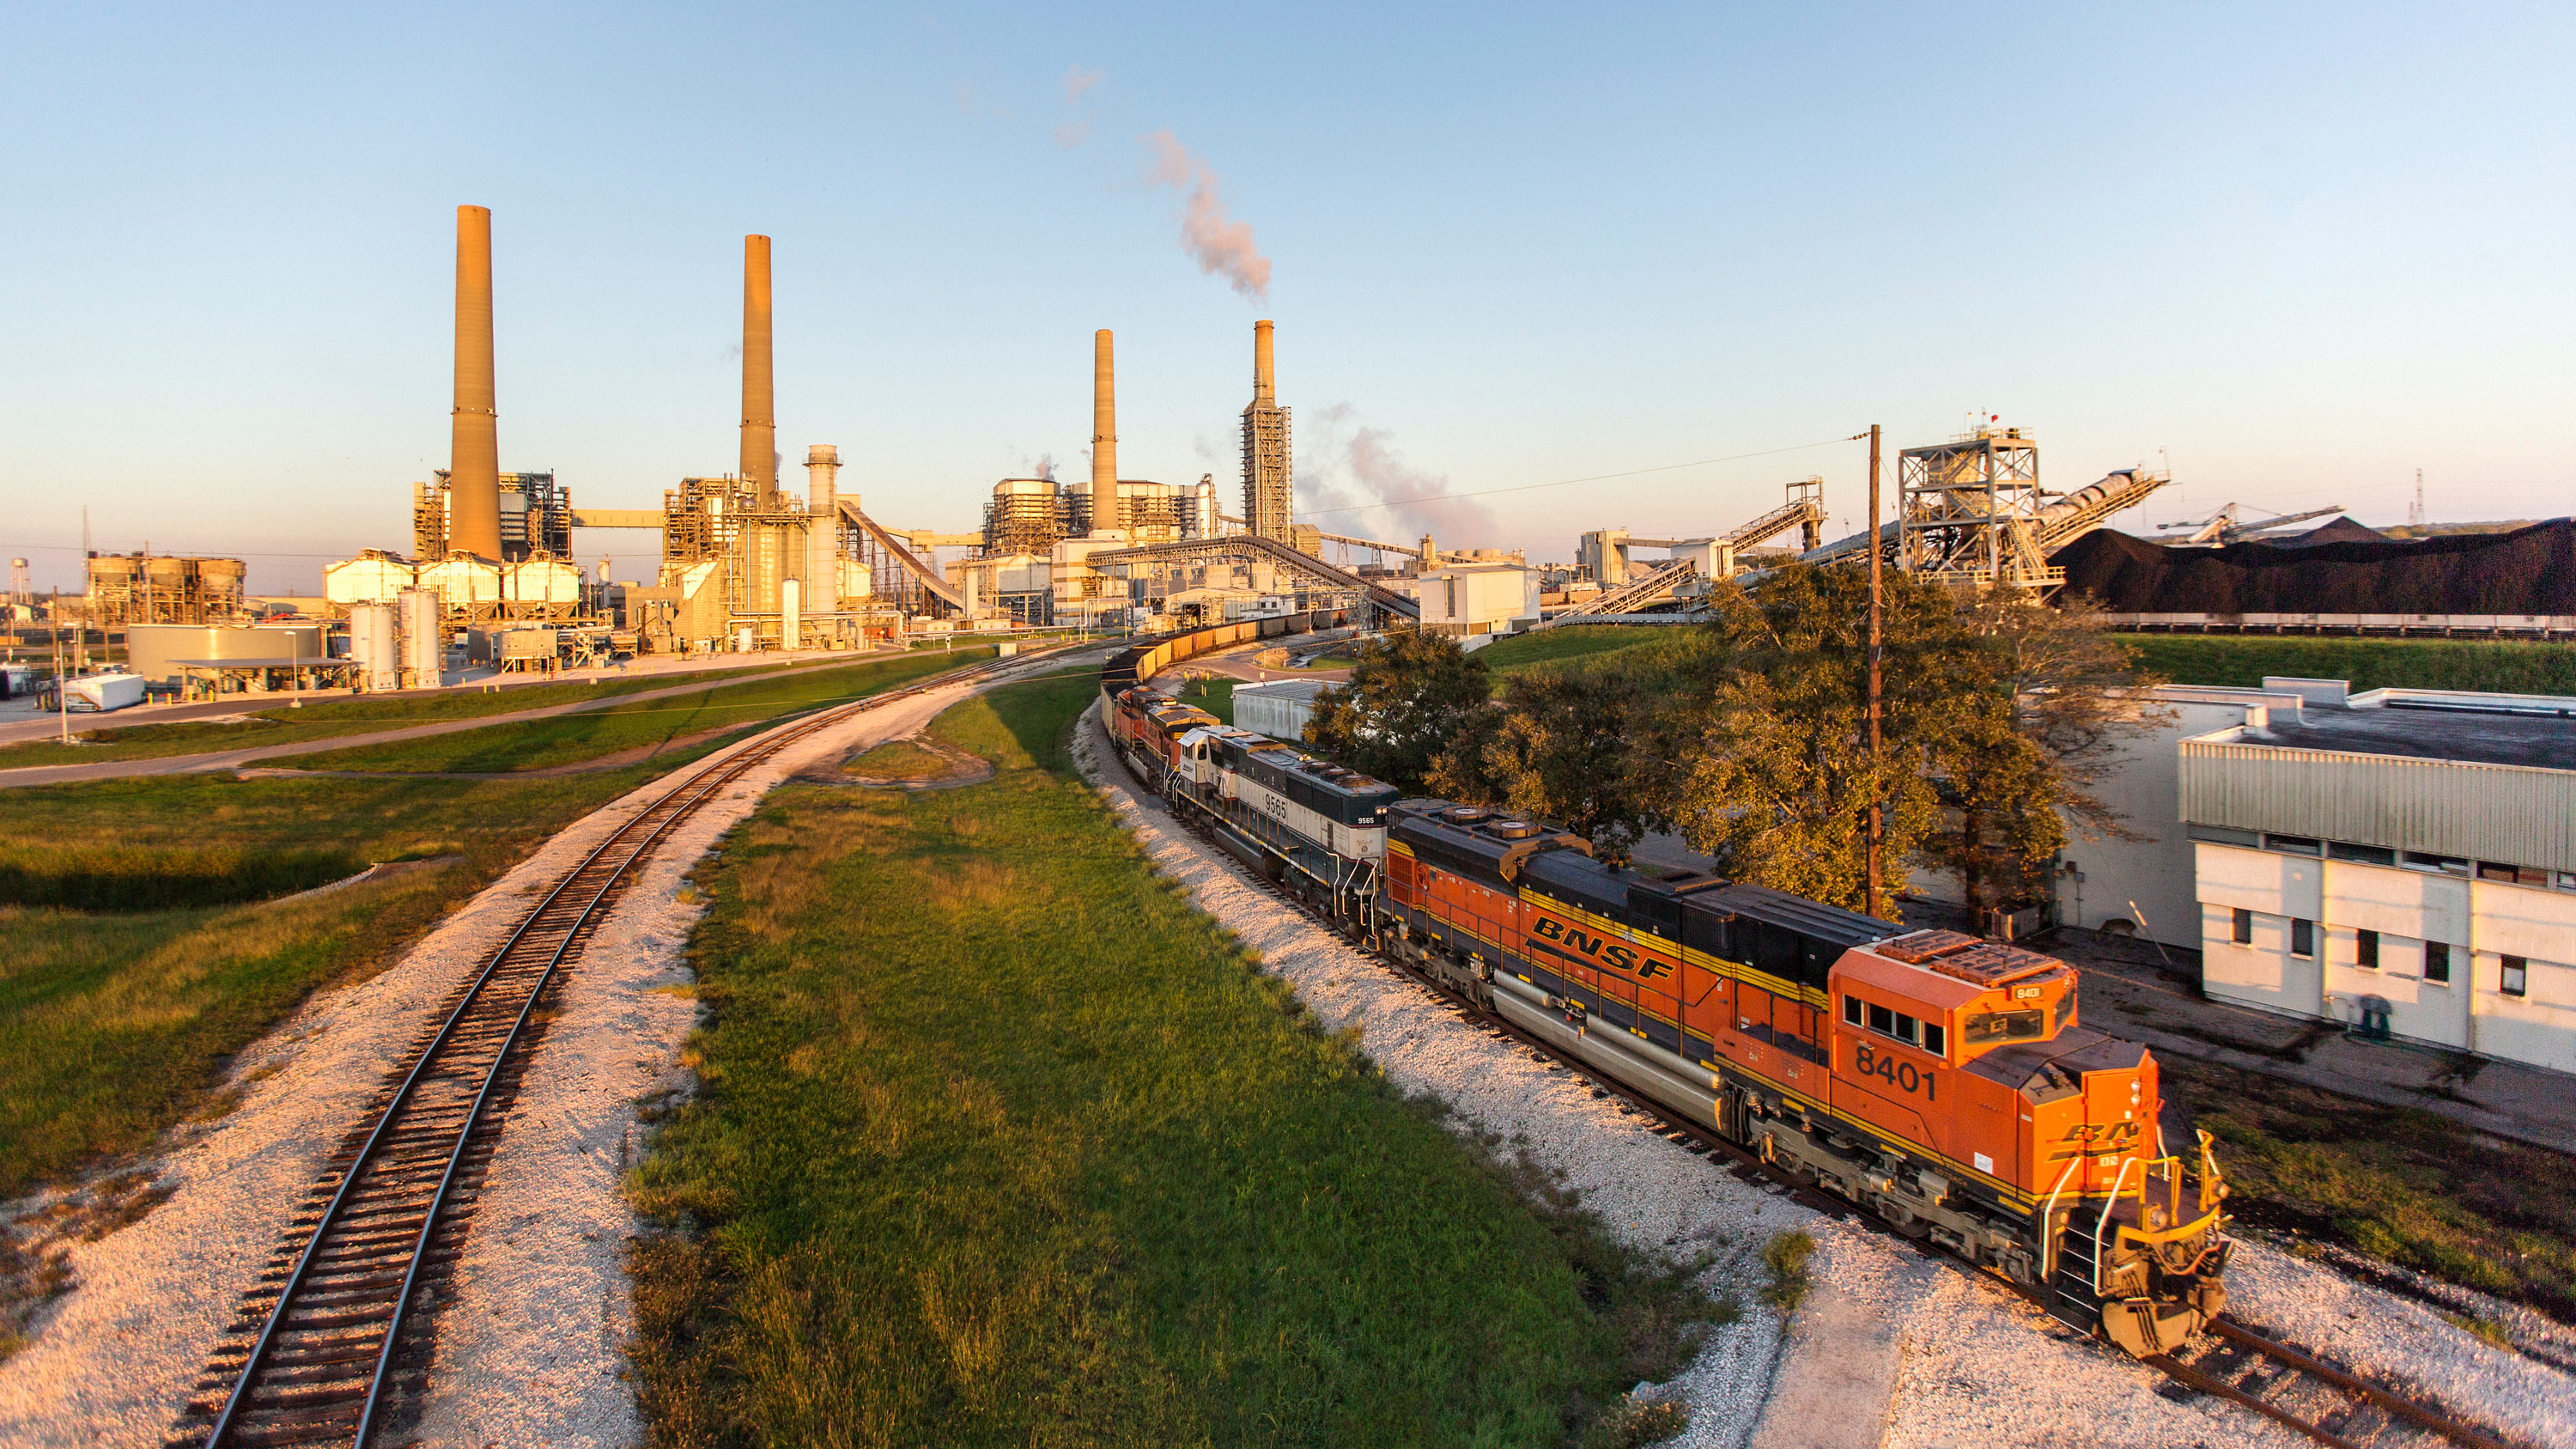 Petra Nova plant at magic hour with train in foreground